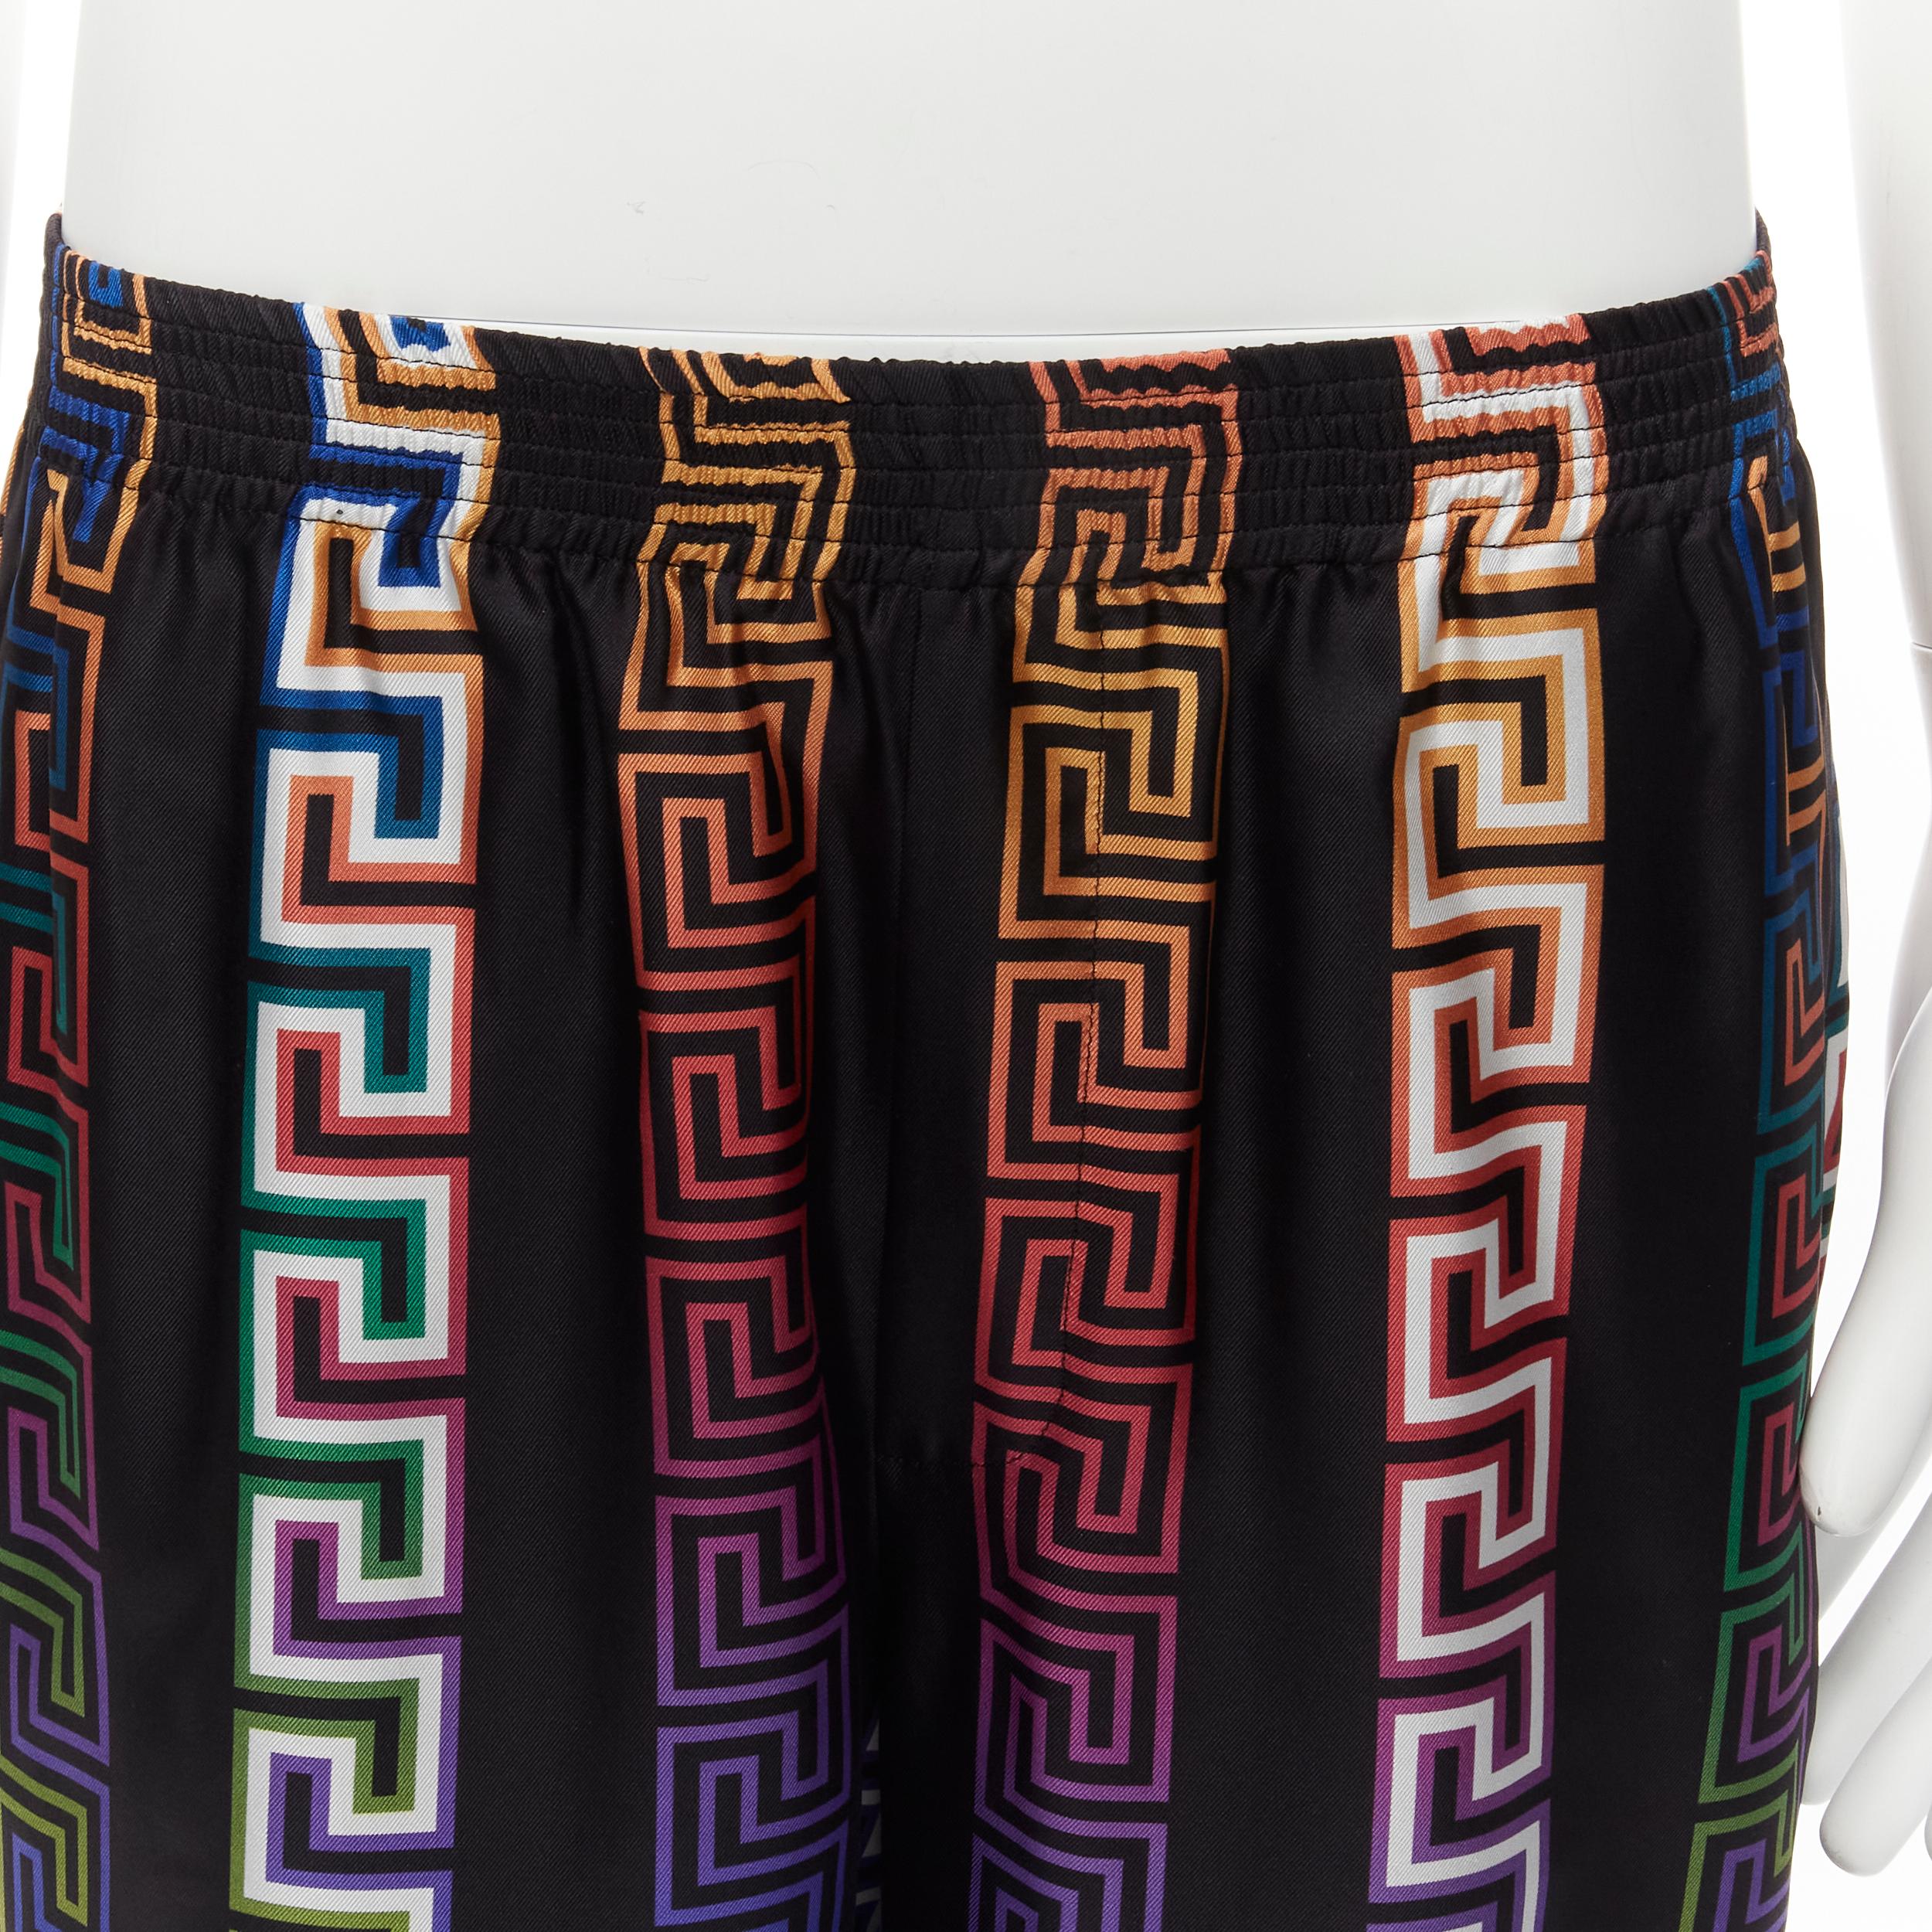 new VERSACE 2021 Runway Neon Greca black college fit silk twill shorts IT46 S
Reference: TGAS/C01817
Brand: Versace
Designer: Donatella Versace
Model: A86243 1A00967 5B020
Collection: 2021 - Runway
Material: Silk
Color: Multicolour
Pattern: